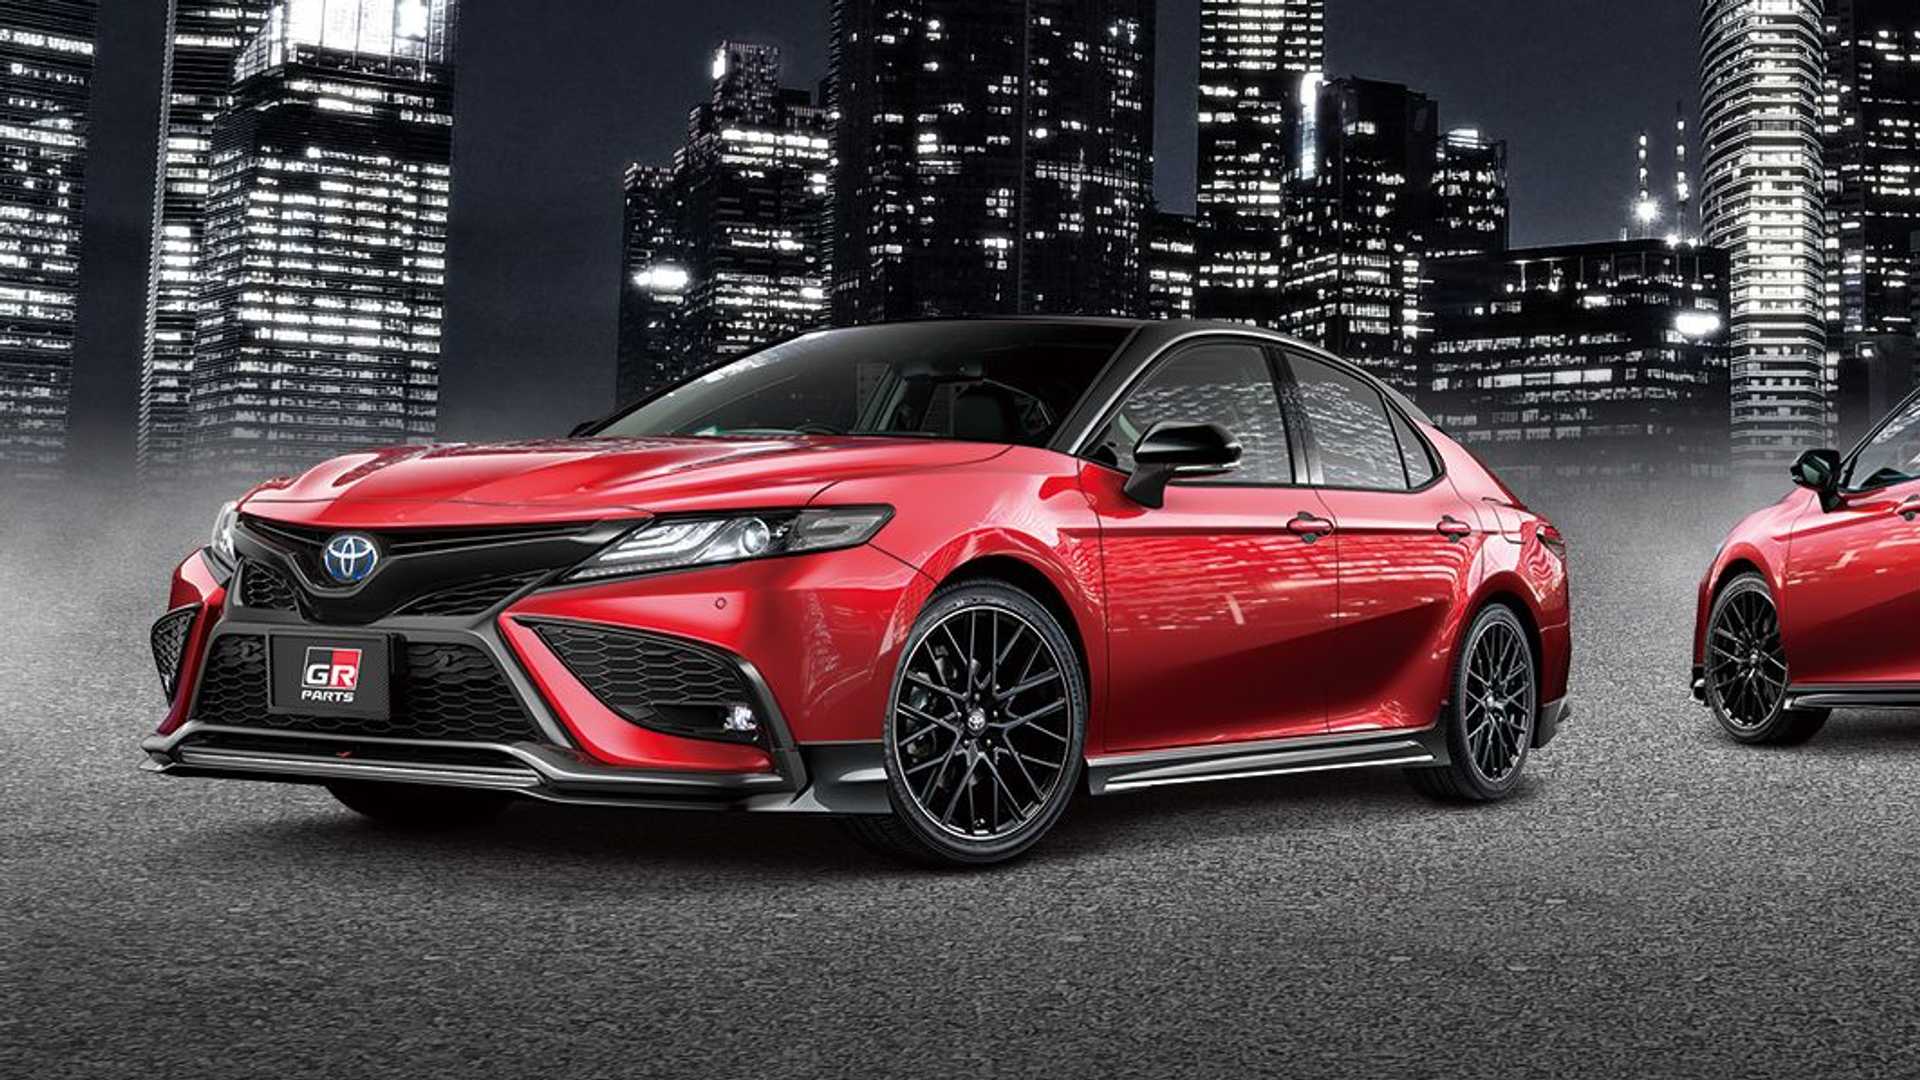 Transform The Toyota Camry With These GR And Modellista Parts Carscoops